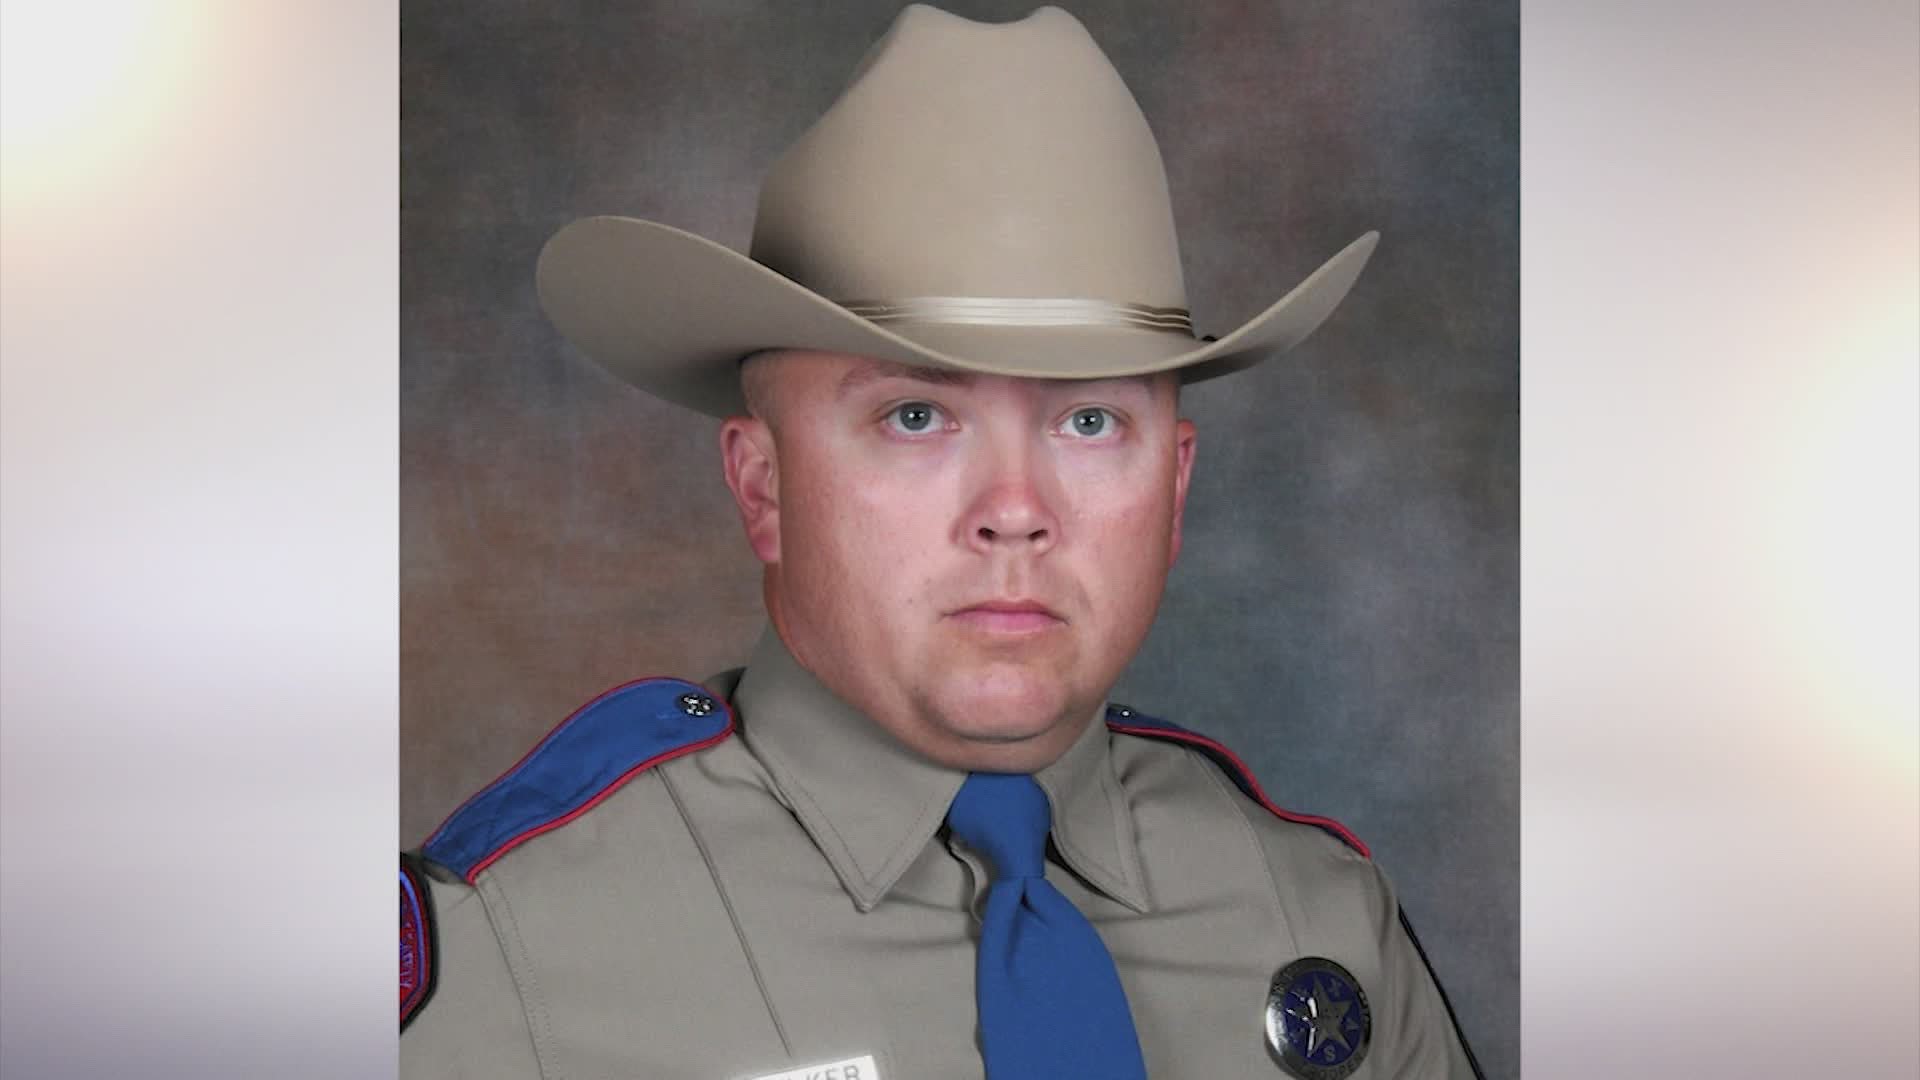 The suspect who was wanted by authorities for reportedly shooting a state trooper died by suicide Saturday evening, according to the Texas DPS Officers Association.